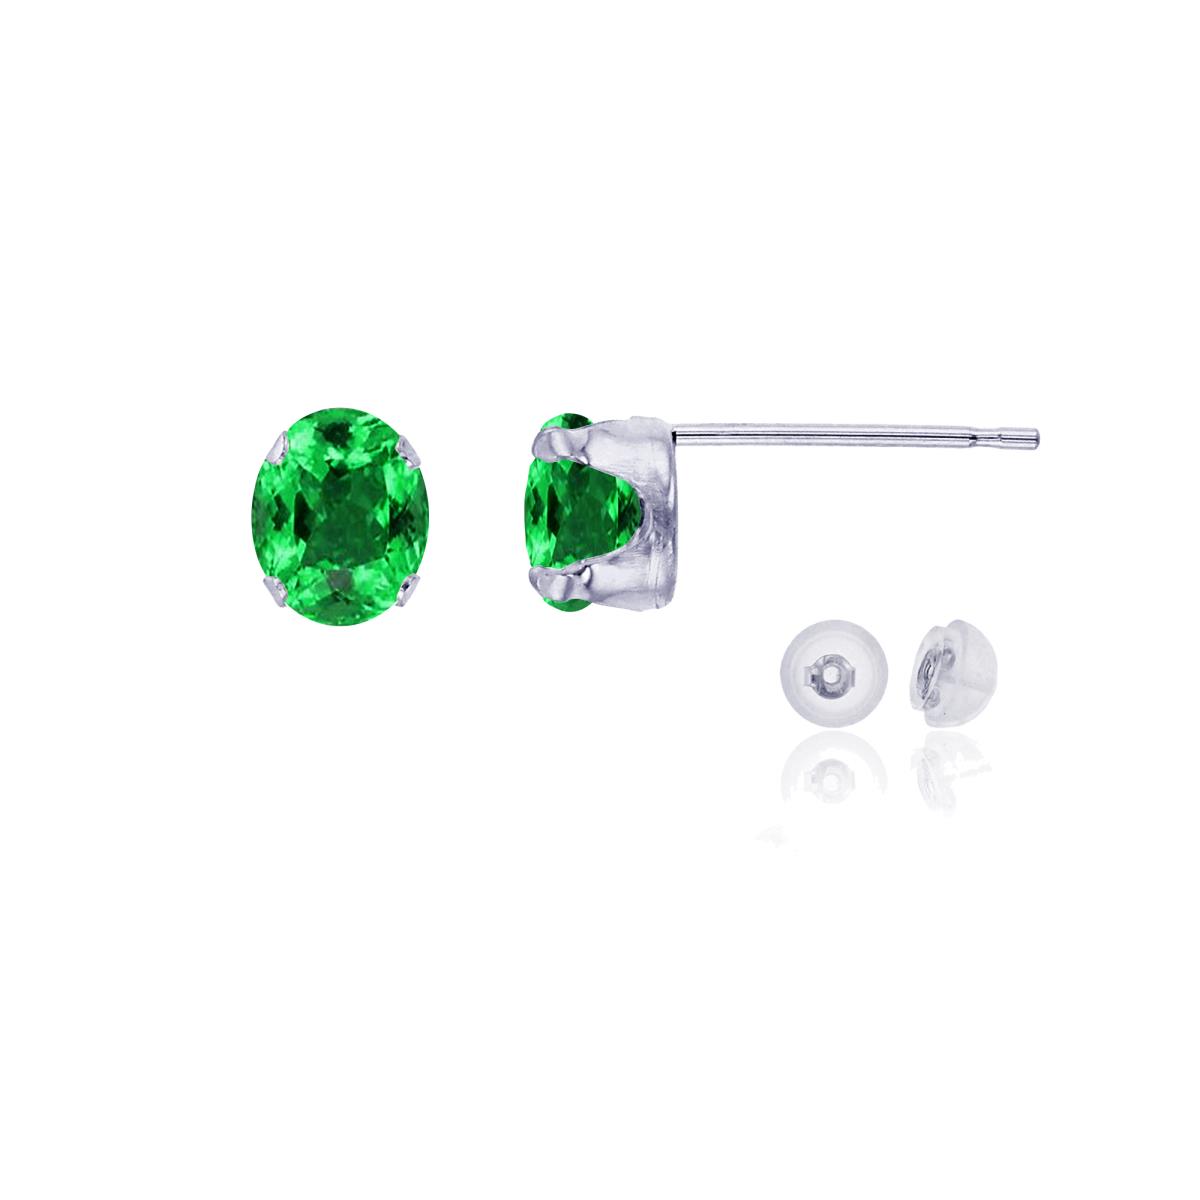 14K White Gold 6x4mm Oval Cr Emerald Stud Earring with Silicone Back